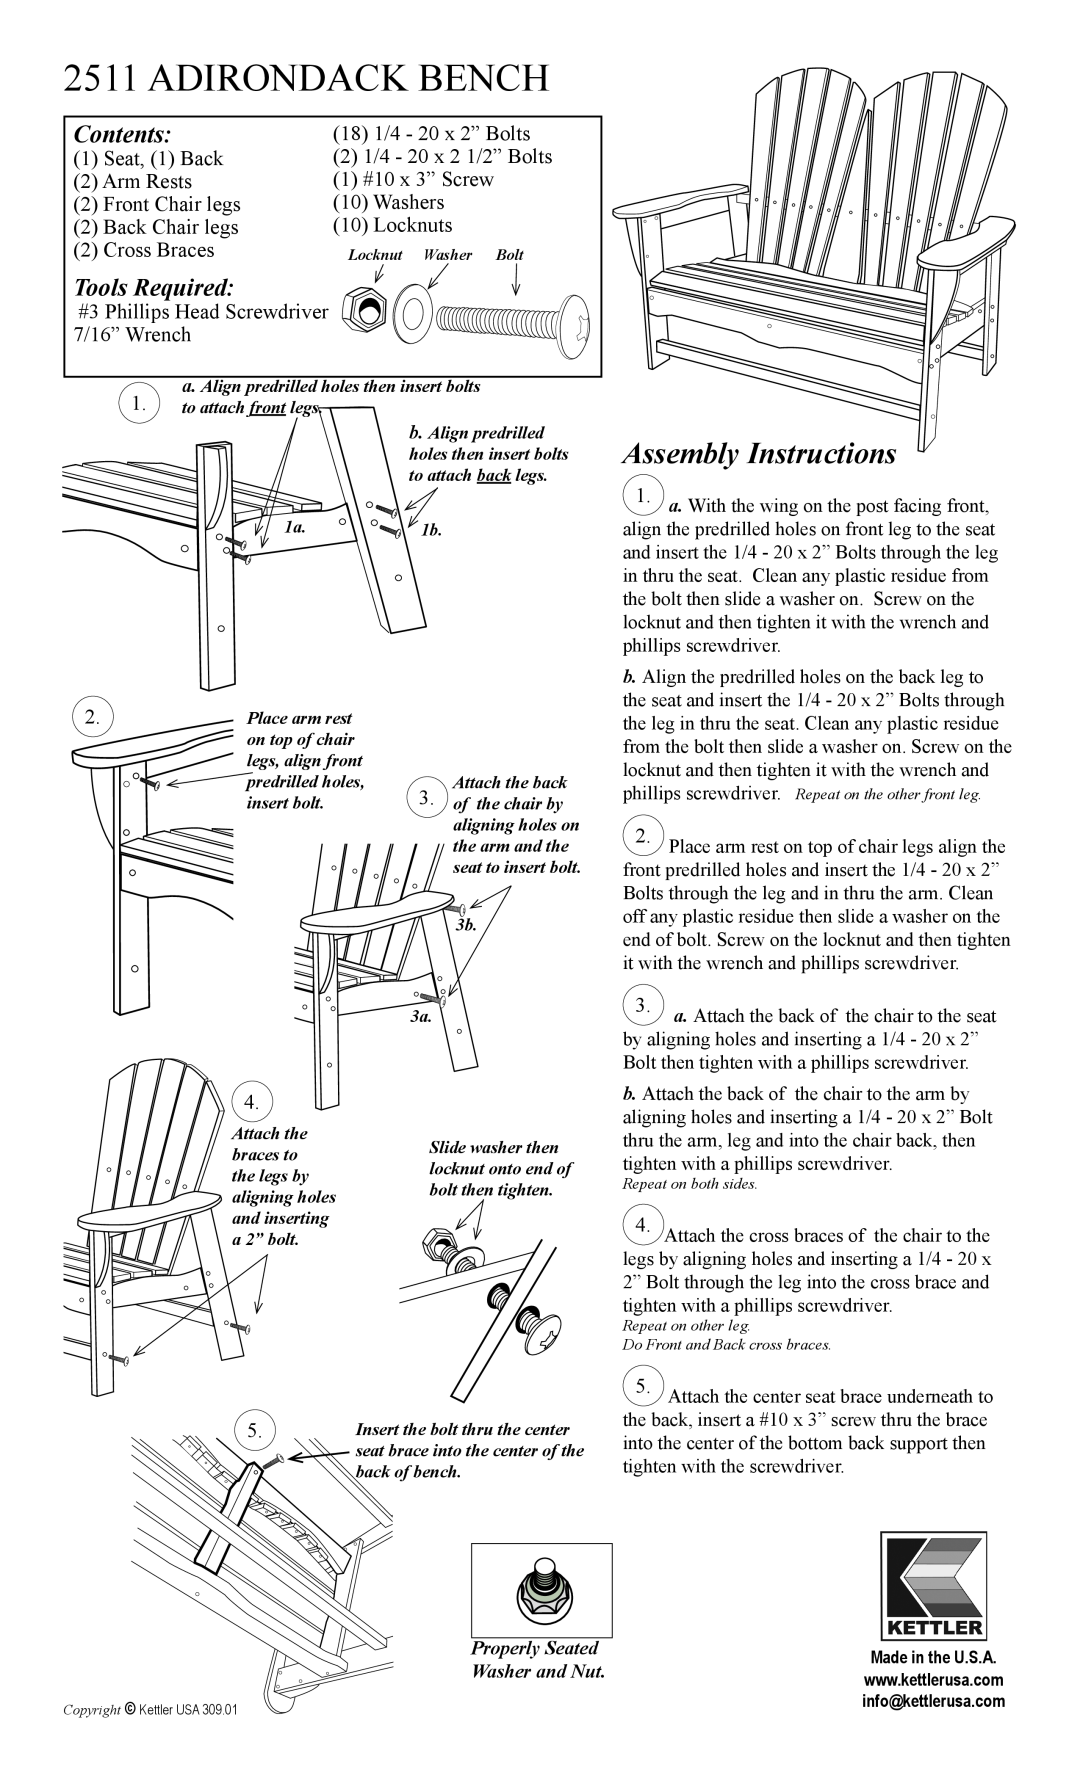 Kettler 2511 manual Adirondack Bench, Assembly Instructions, Contents, Tools Required 